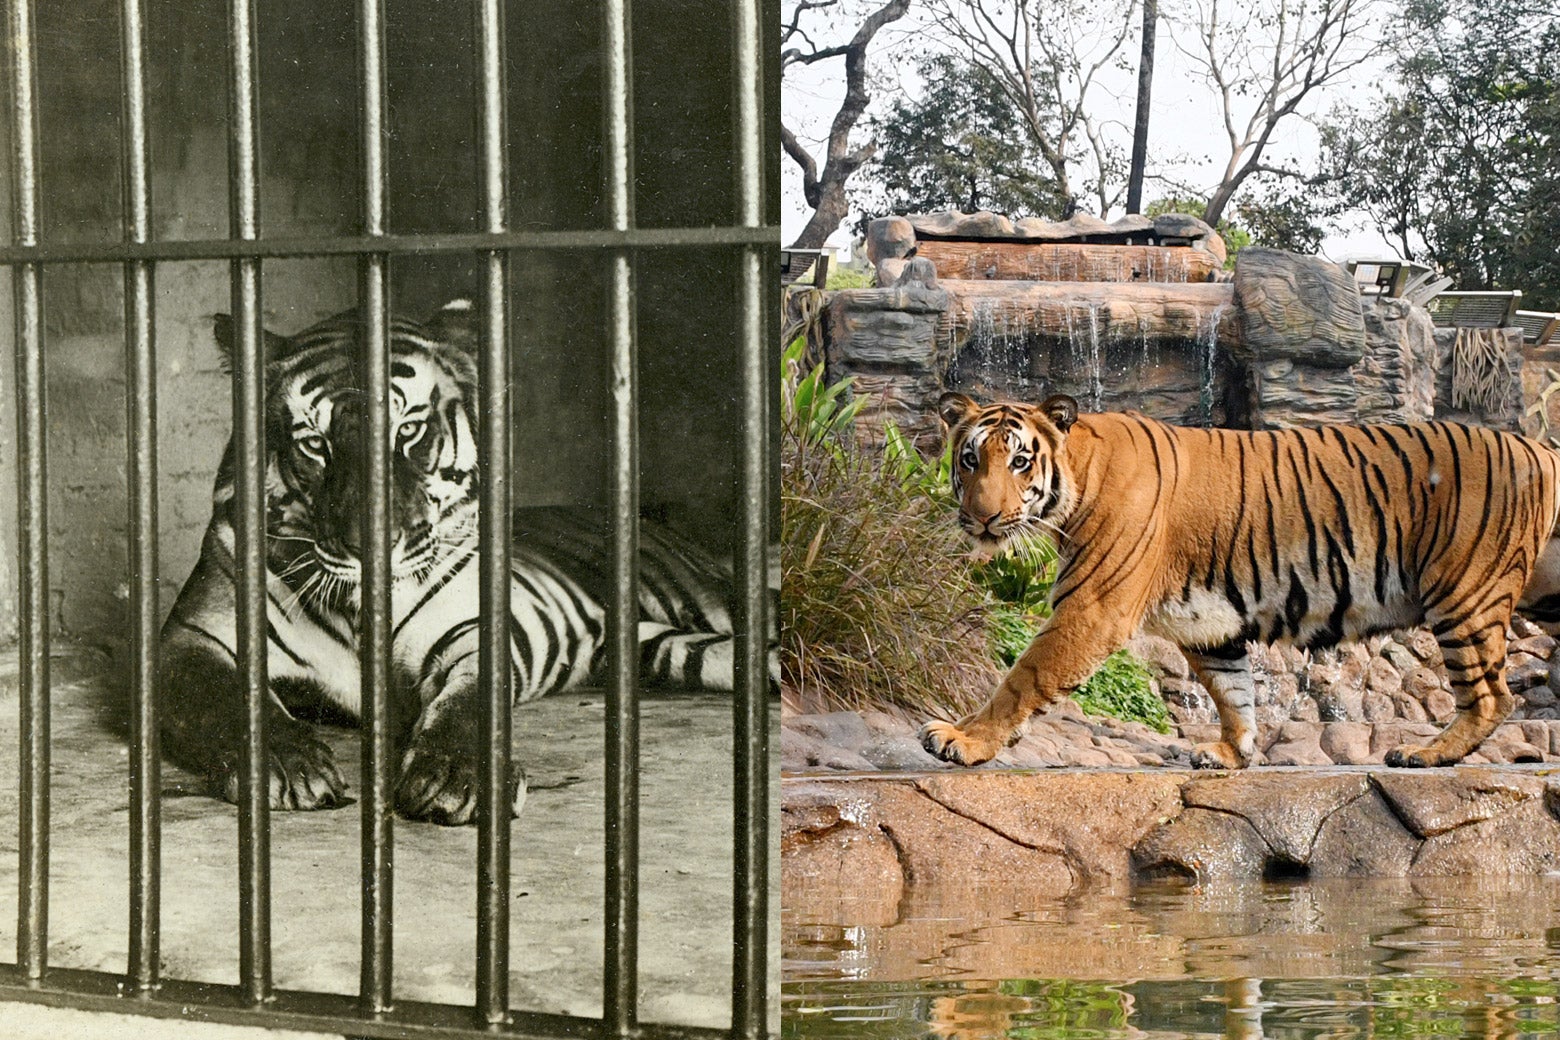 Why Zoos Can’t Completely Lock Down to Prevent What Happened in Dallas Daniel Bisgrove